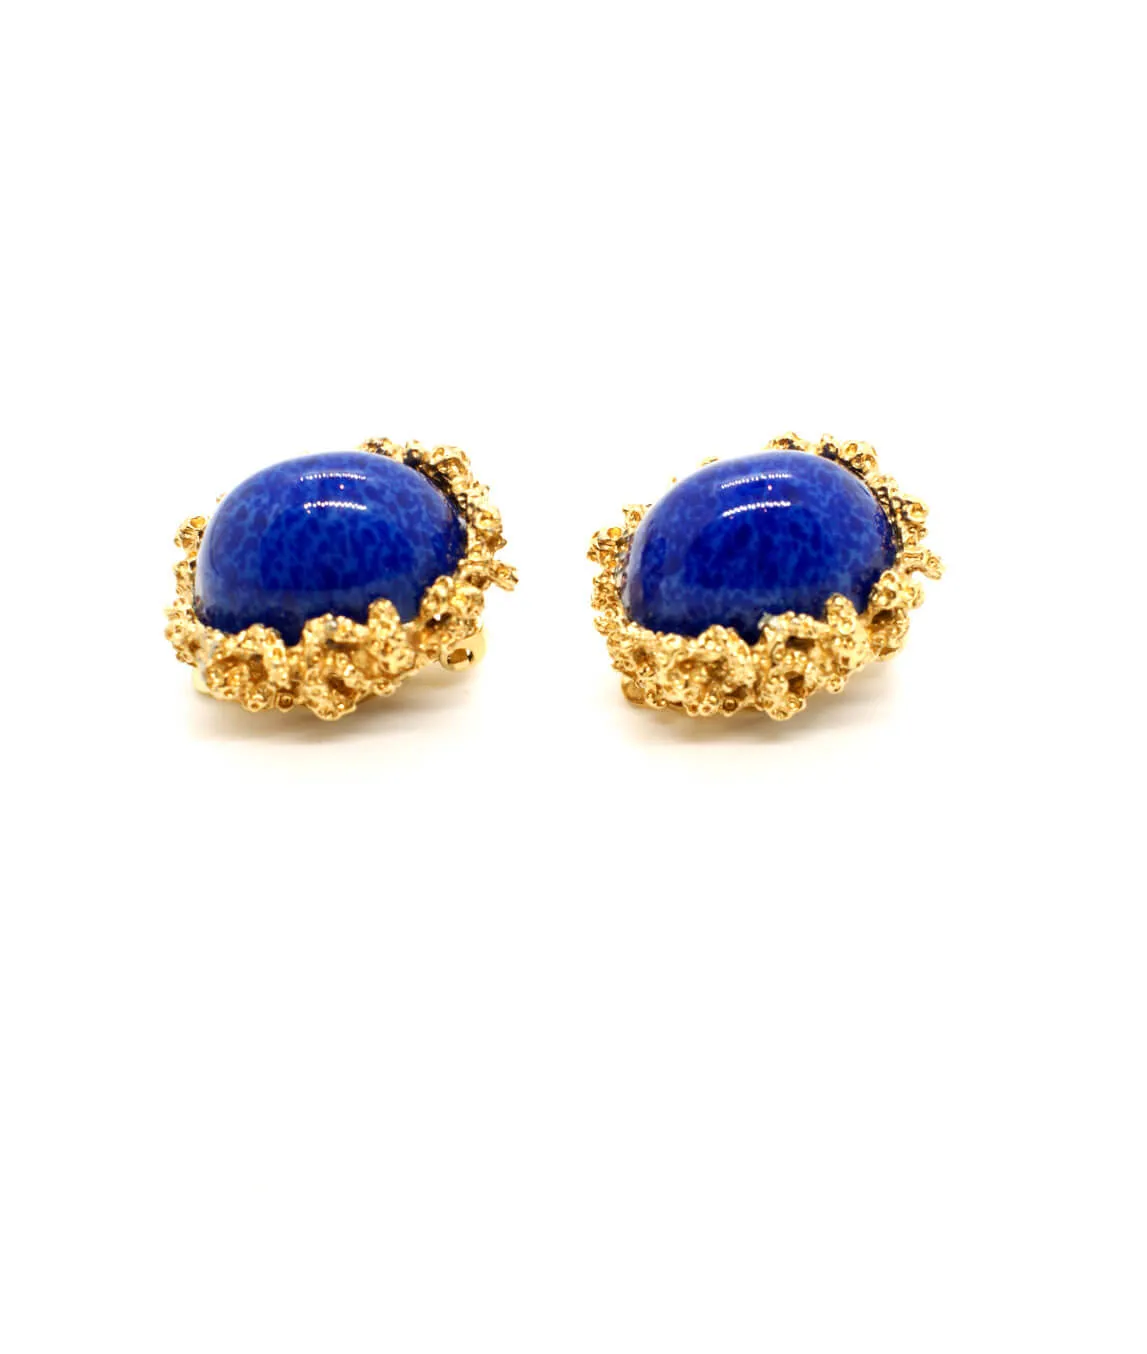 Blue and gold vintage clip earrings